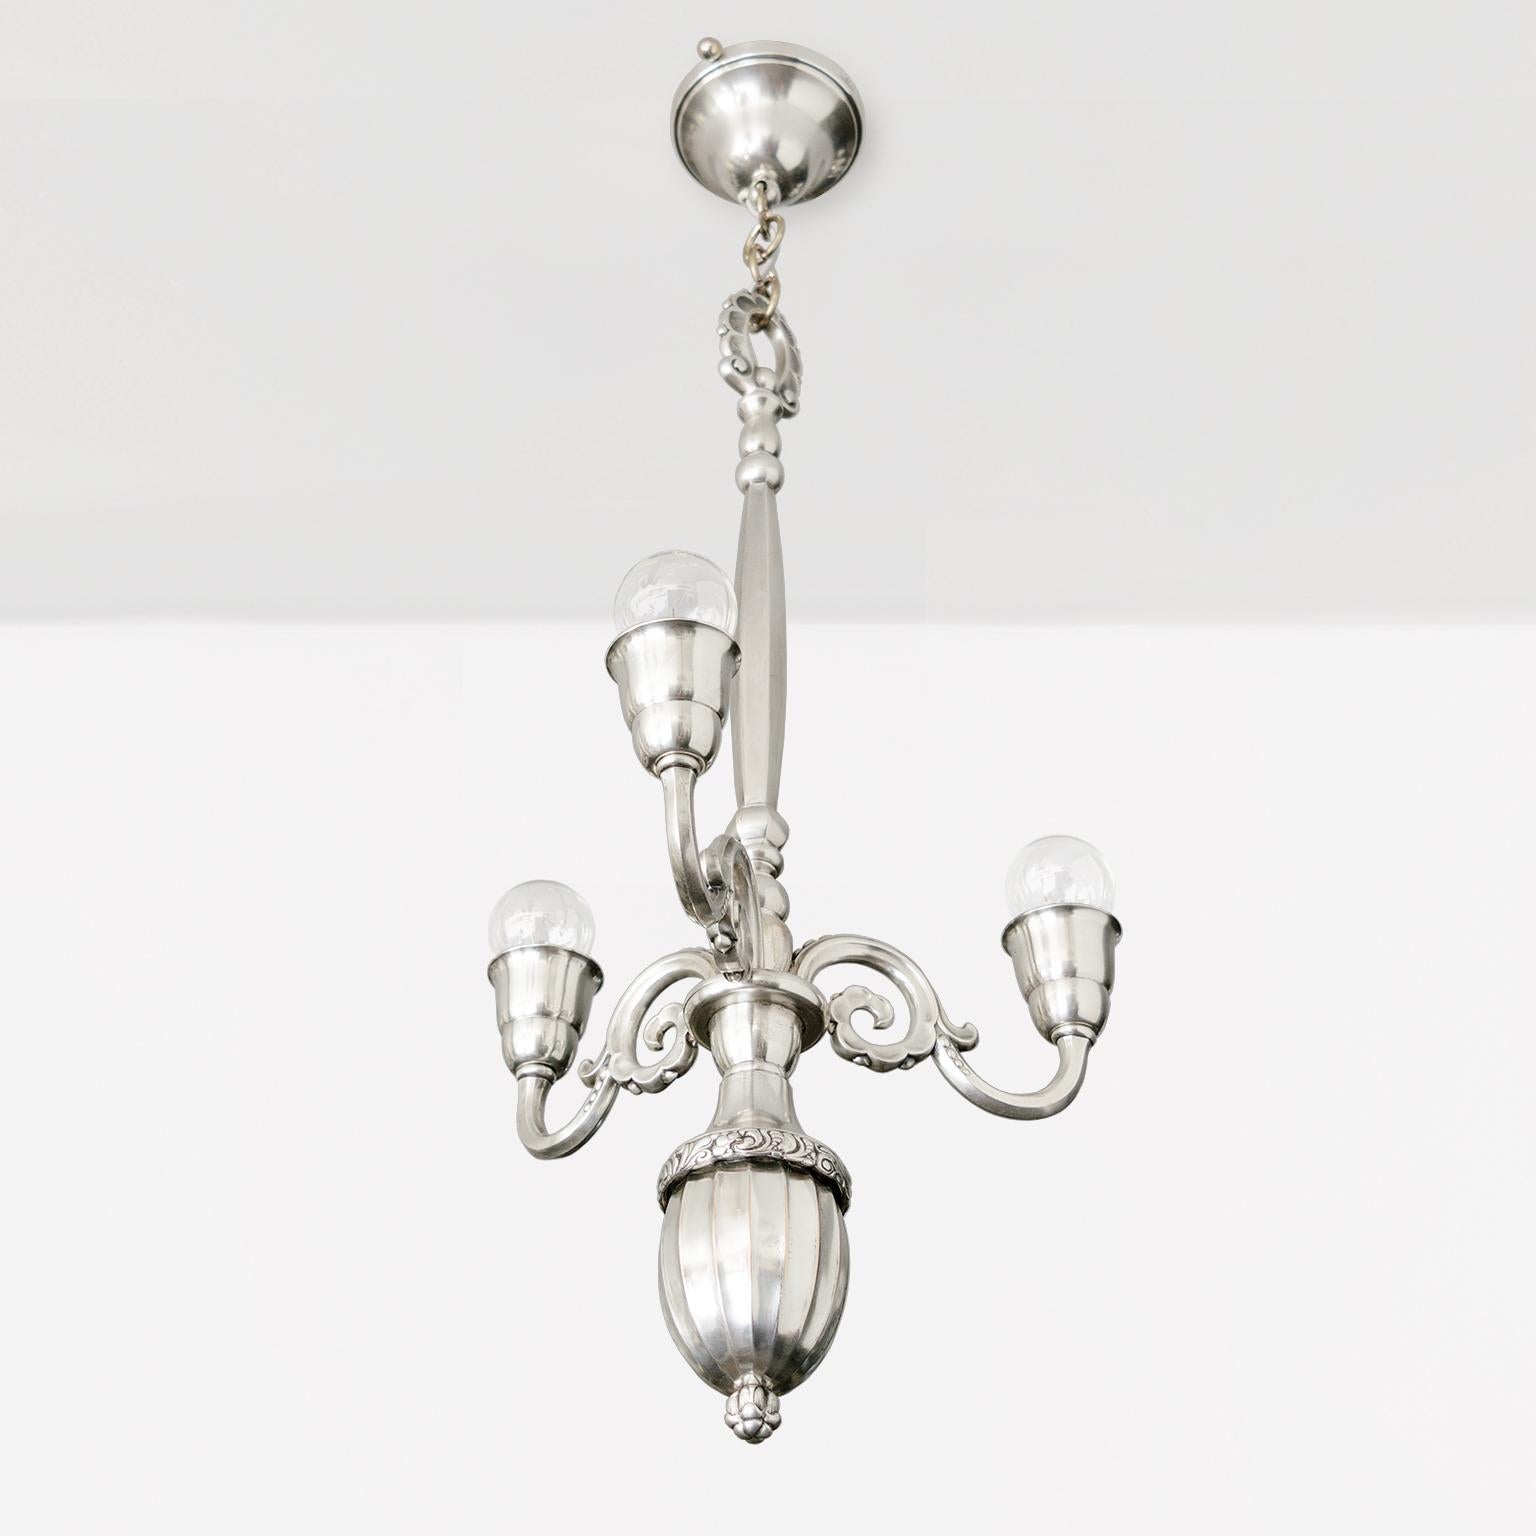 Elis Bergh 3-Arm Silver Plated Chandelier for C.G. Hallberg, Sweden In Good Condition For Sale In New York, NY